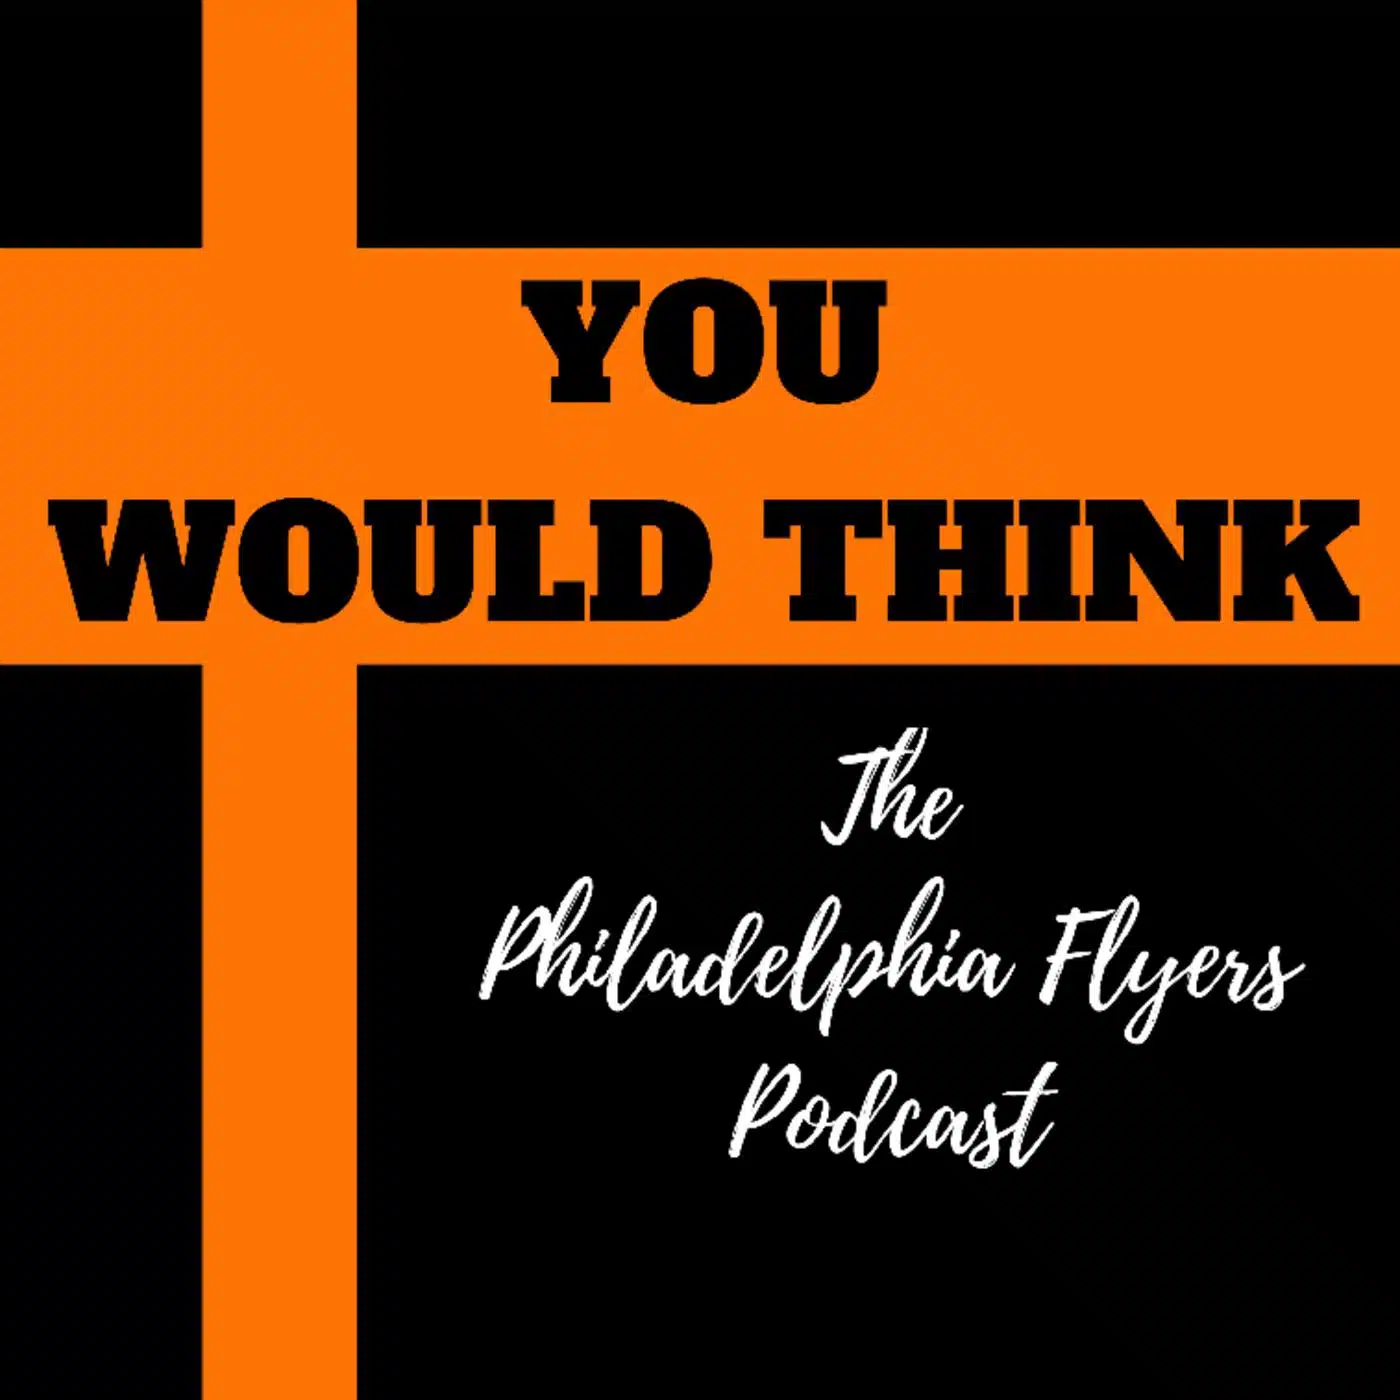 YWT: The Philadelphia Flyers Podcast – YWT #214 – So You’re Saying There’s A Chance?